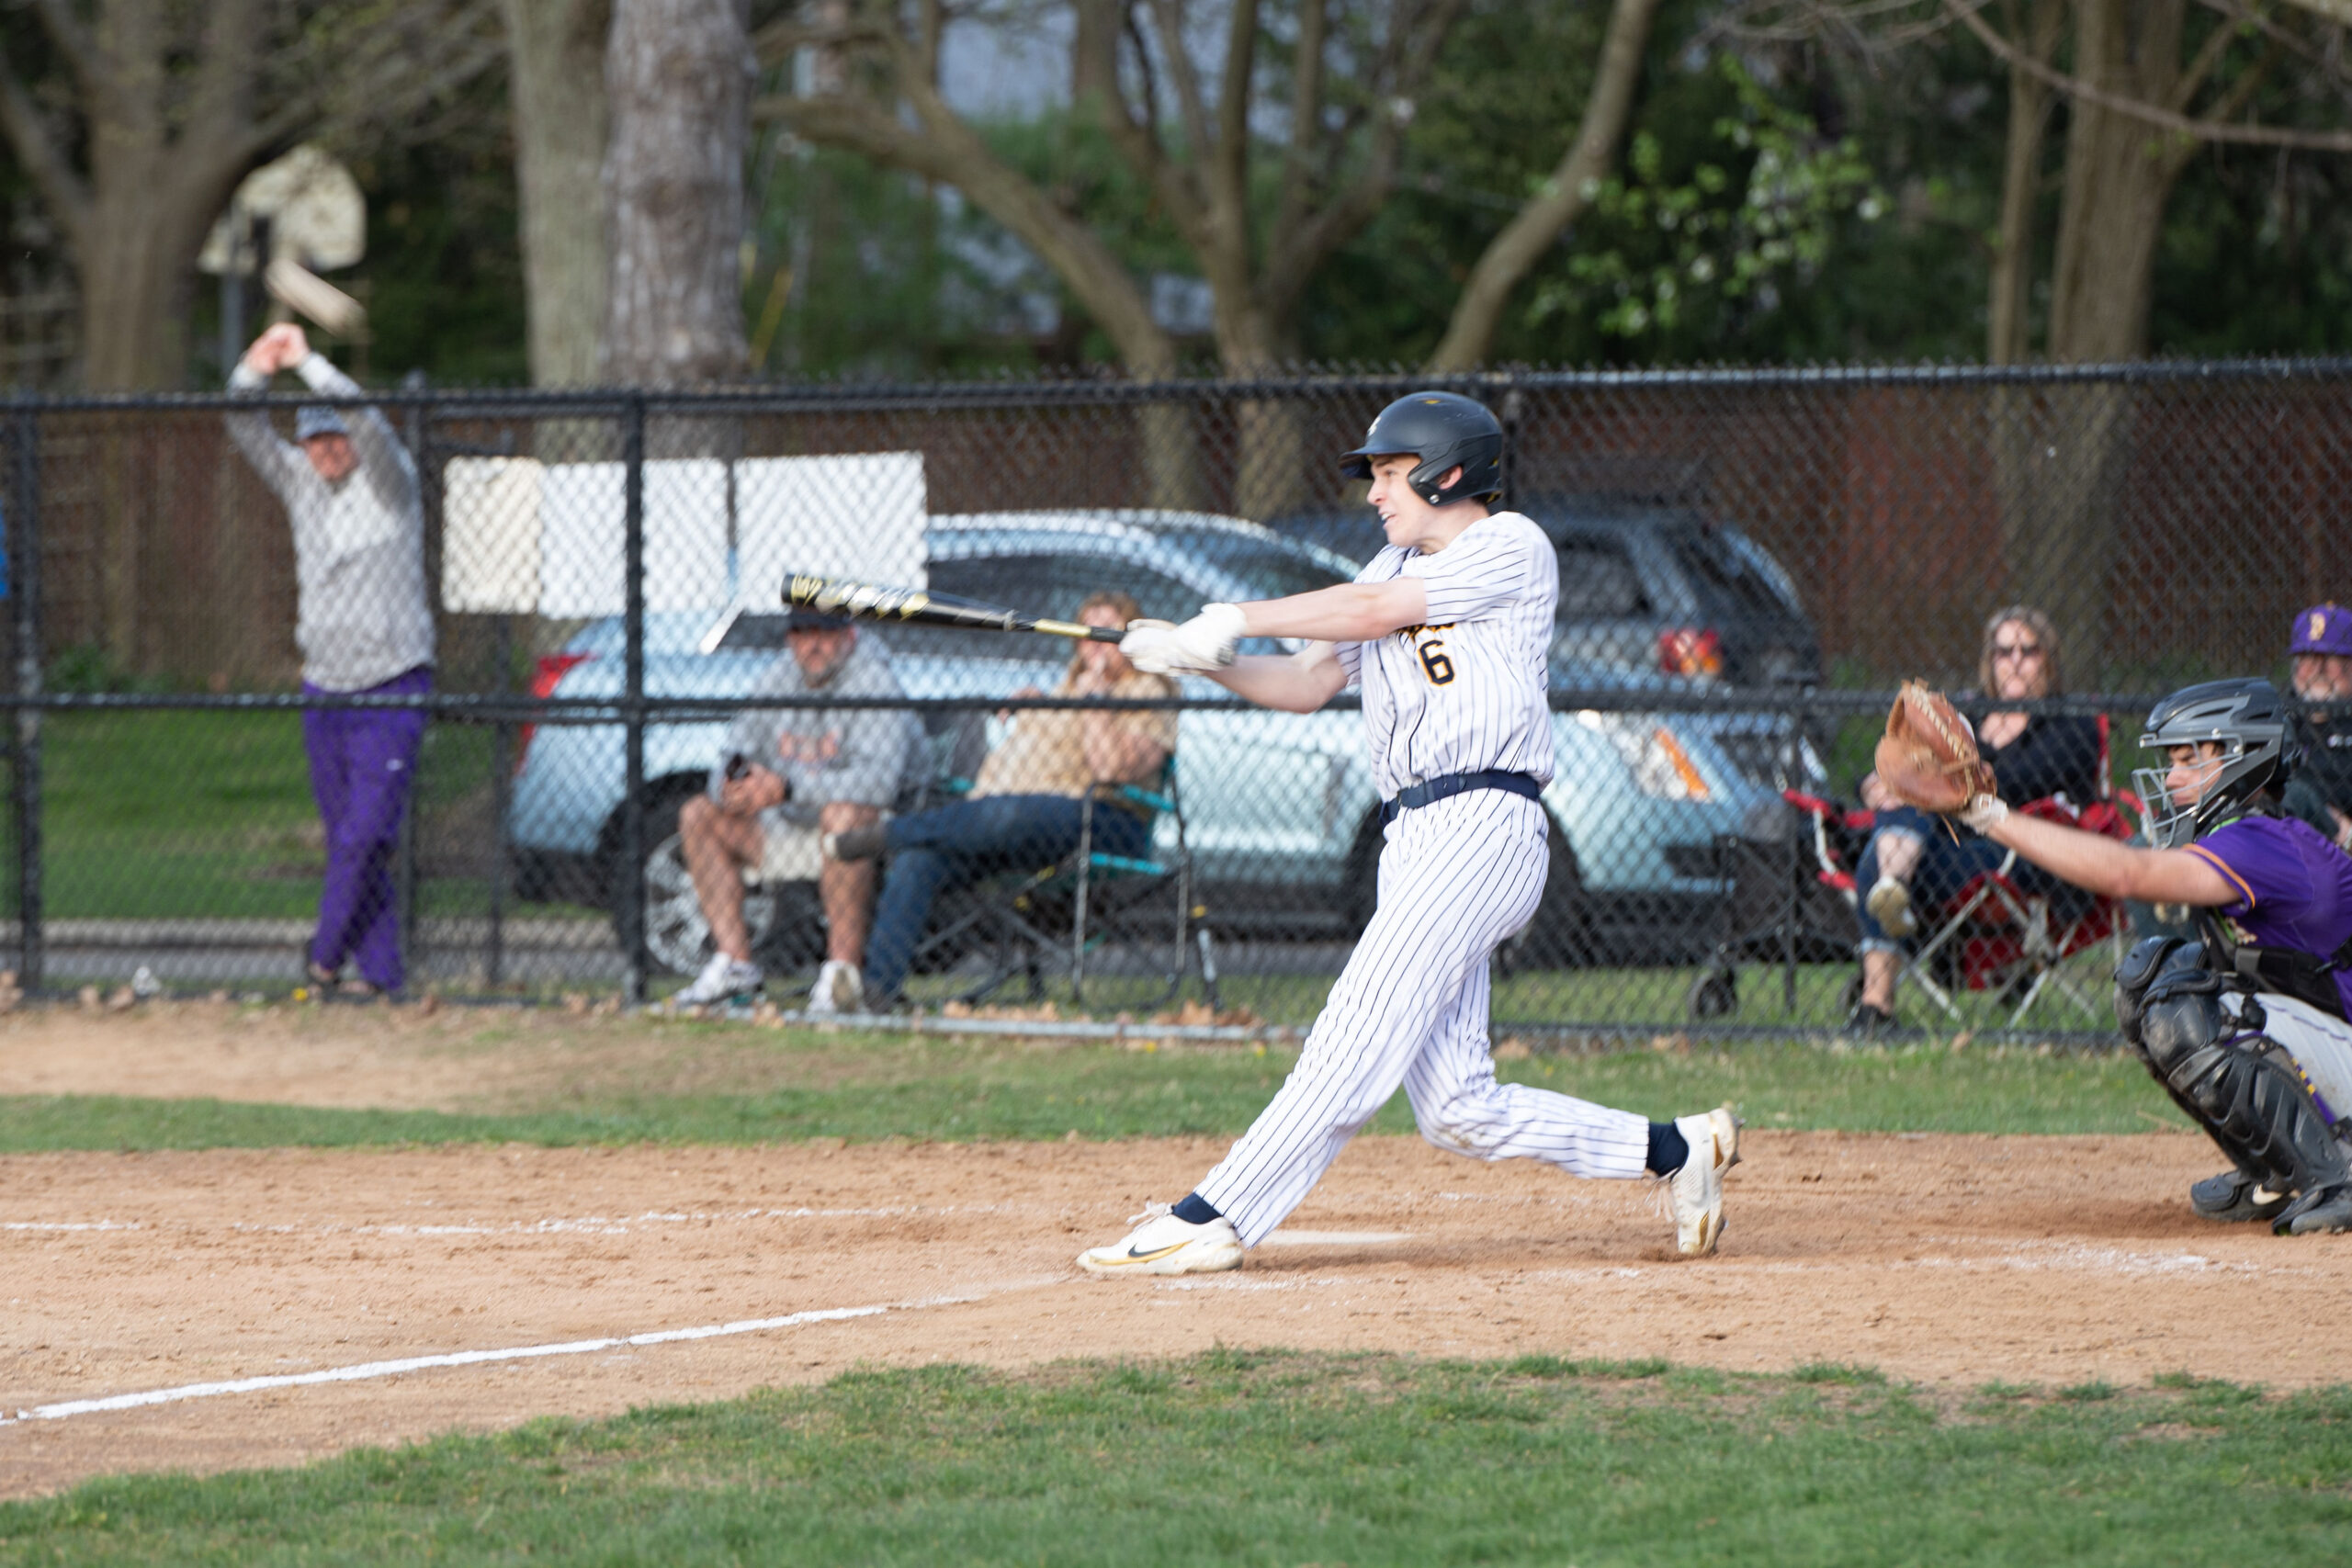 baseball player swinging to hit a pitch